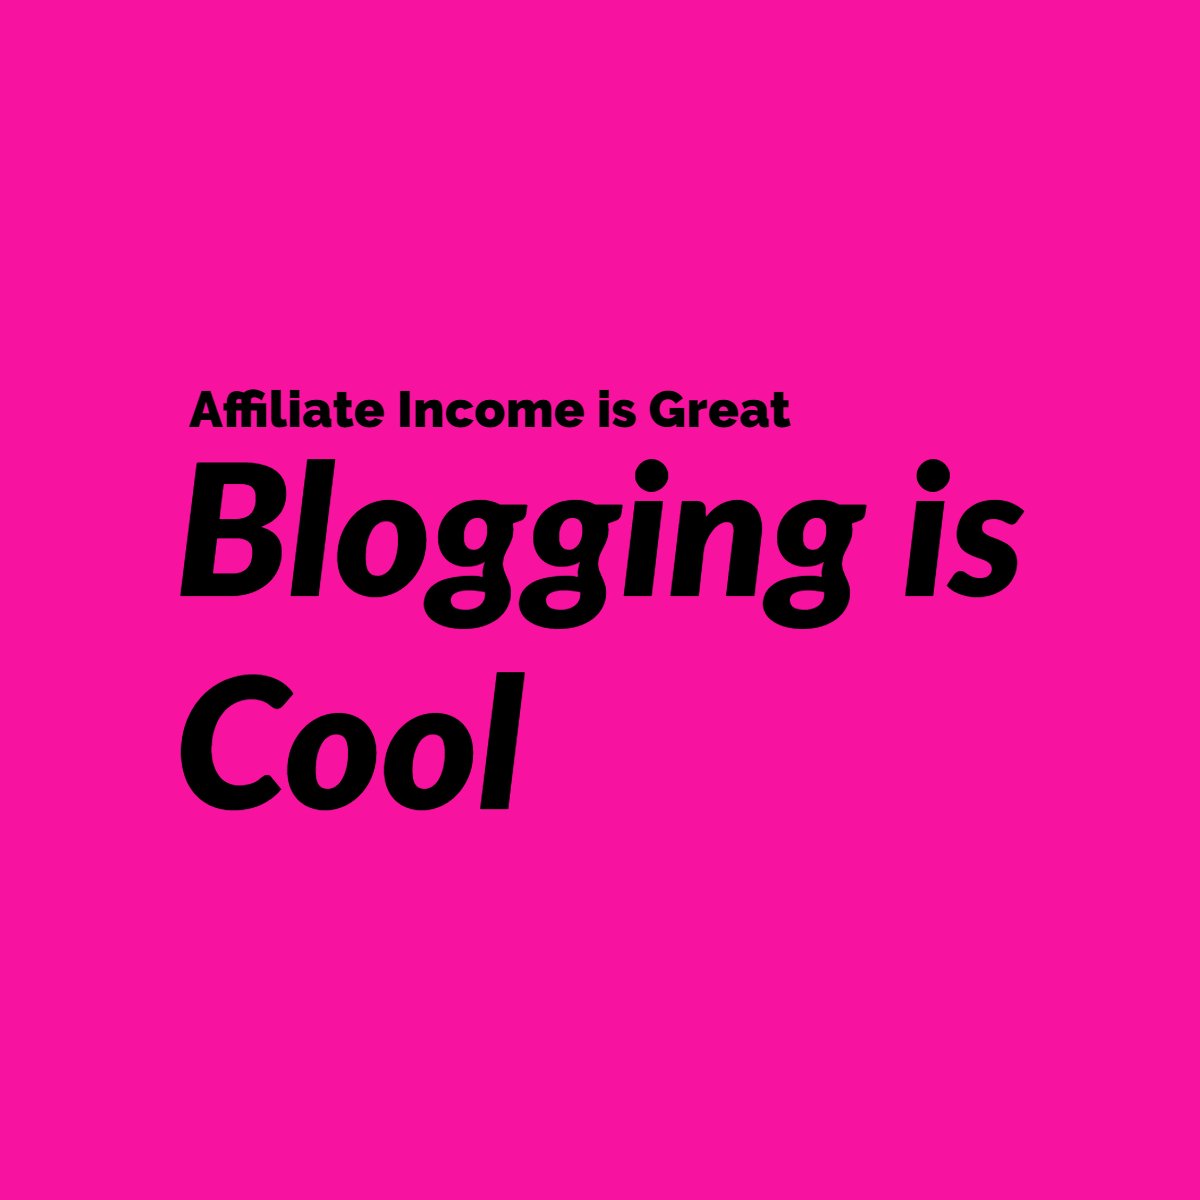 Bloggingiscool.com How to Quickly Improve Internal and External Linking in Your Blog